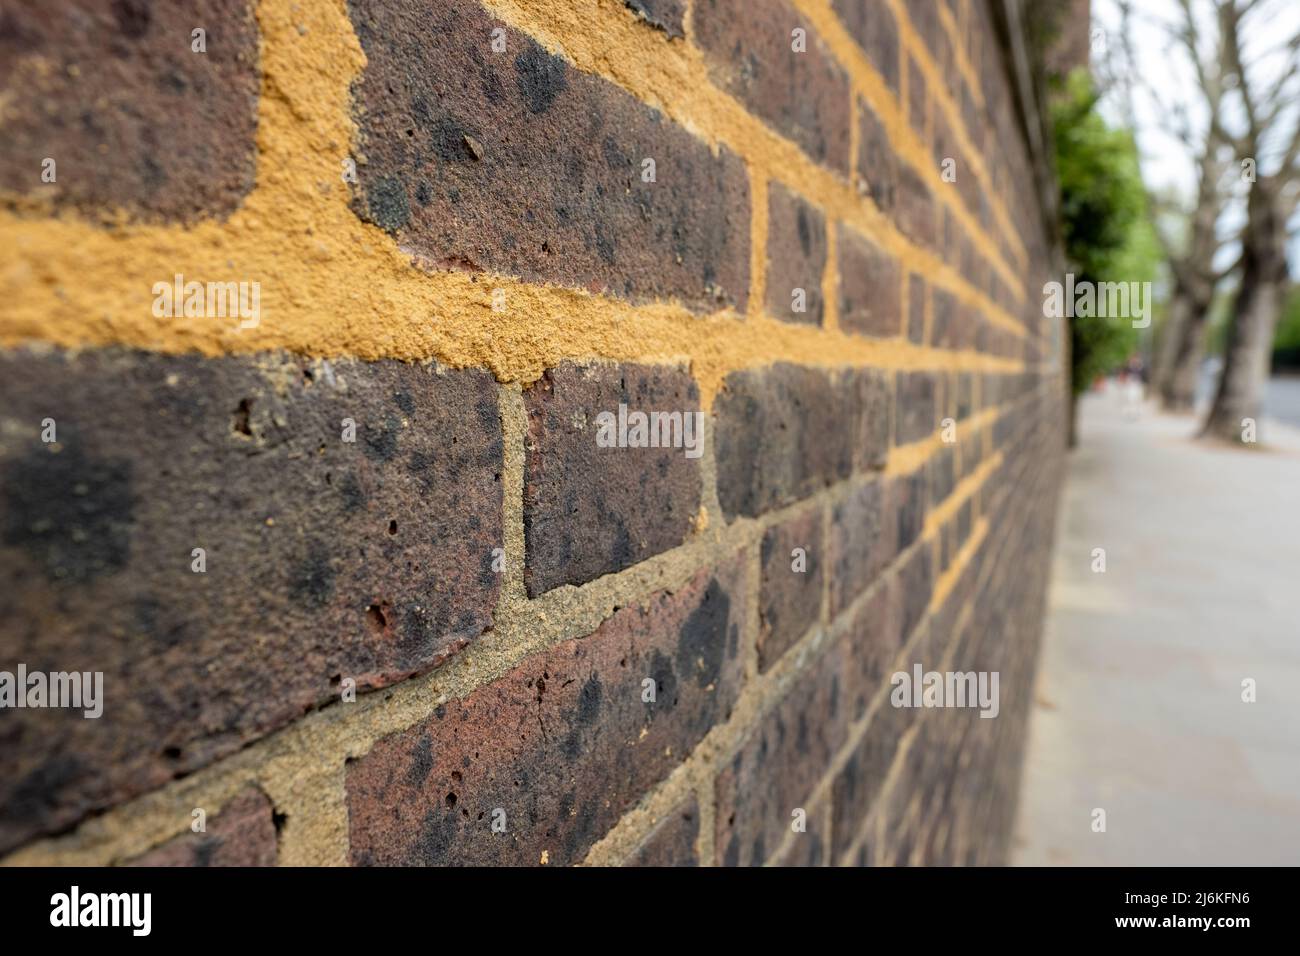 Repointing work on an old brick wall with mortar mix Stock Photo